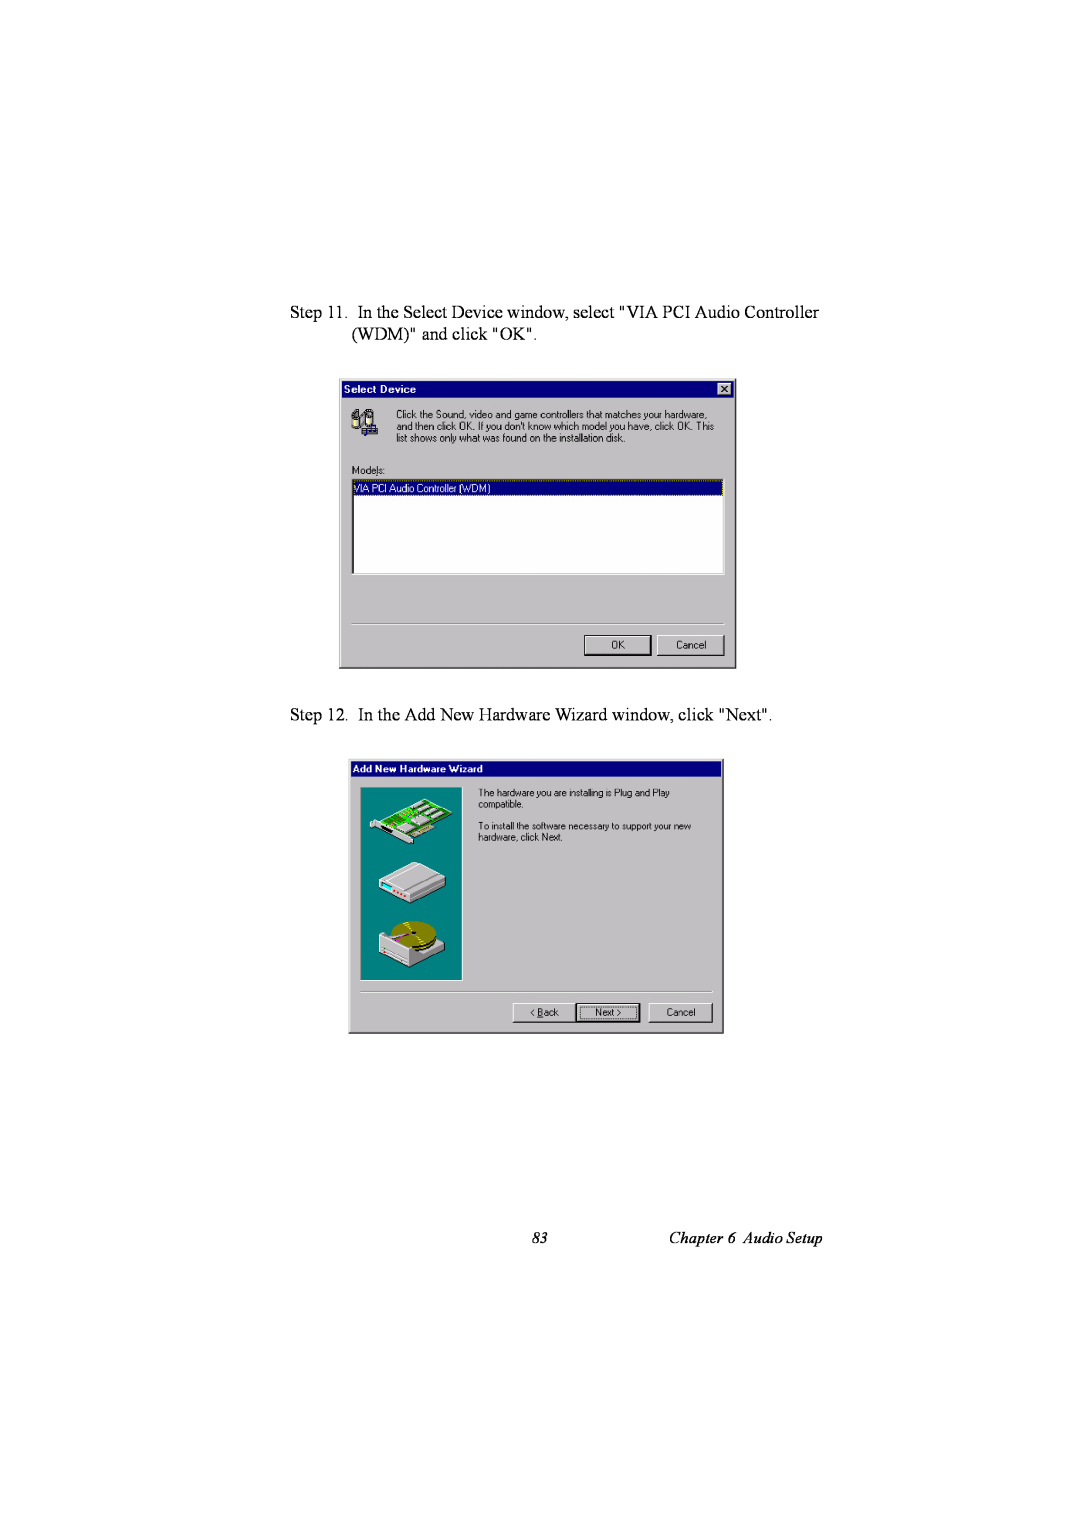 IBM 100/10, PCM-9575 user manual In the Add New Hardware Wizard window, click Next, Audio Setup 